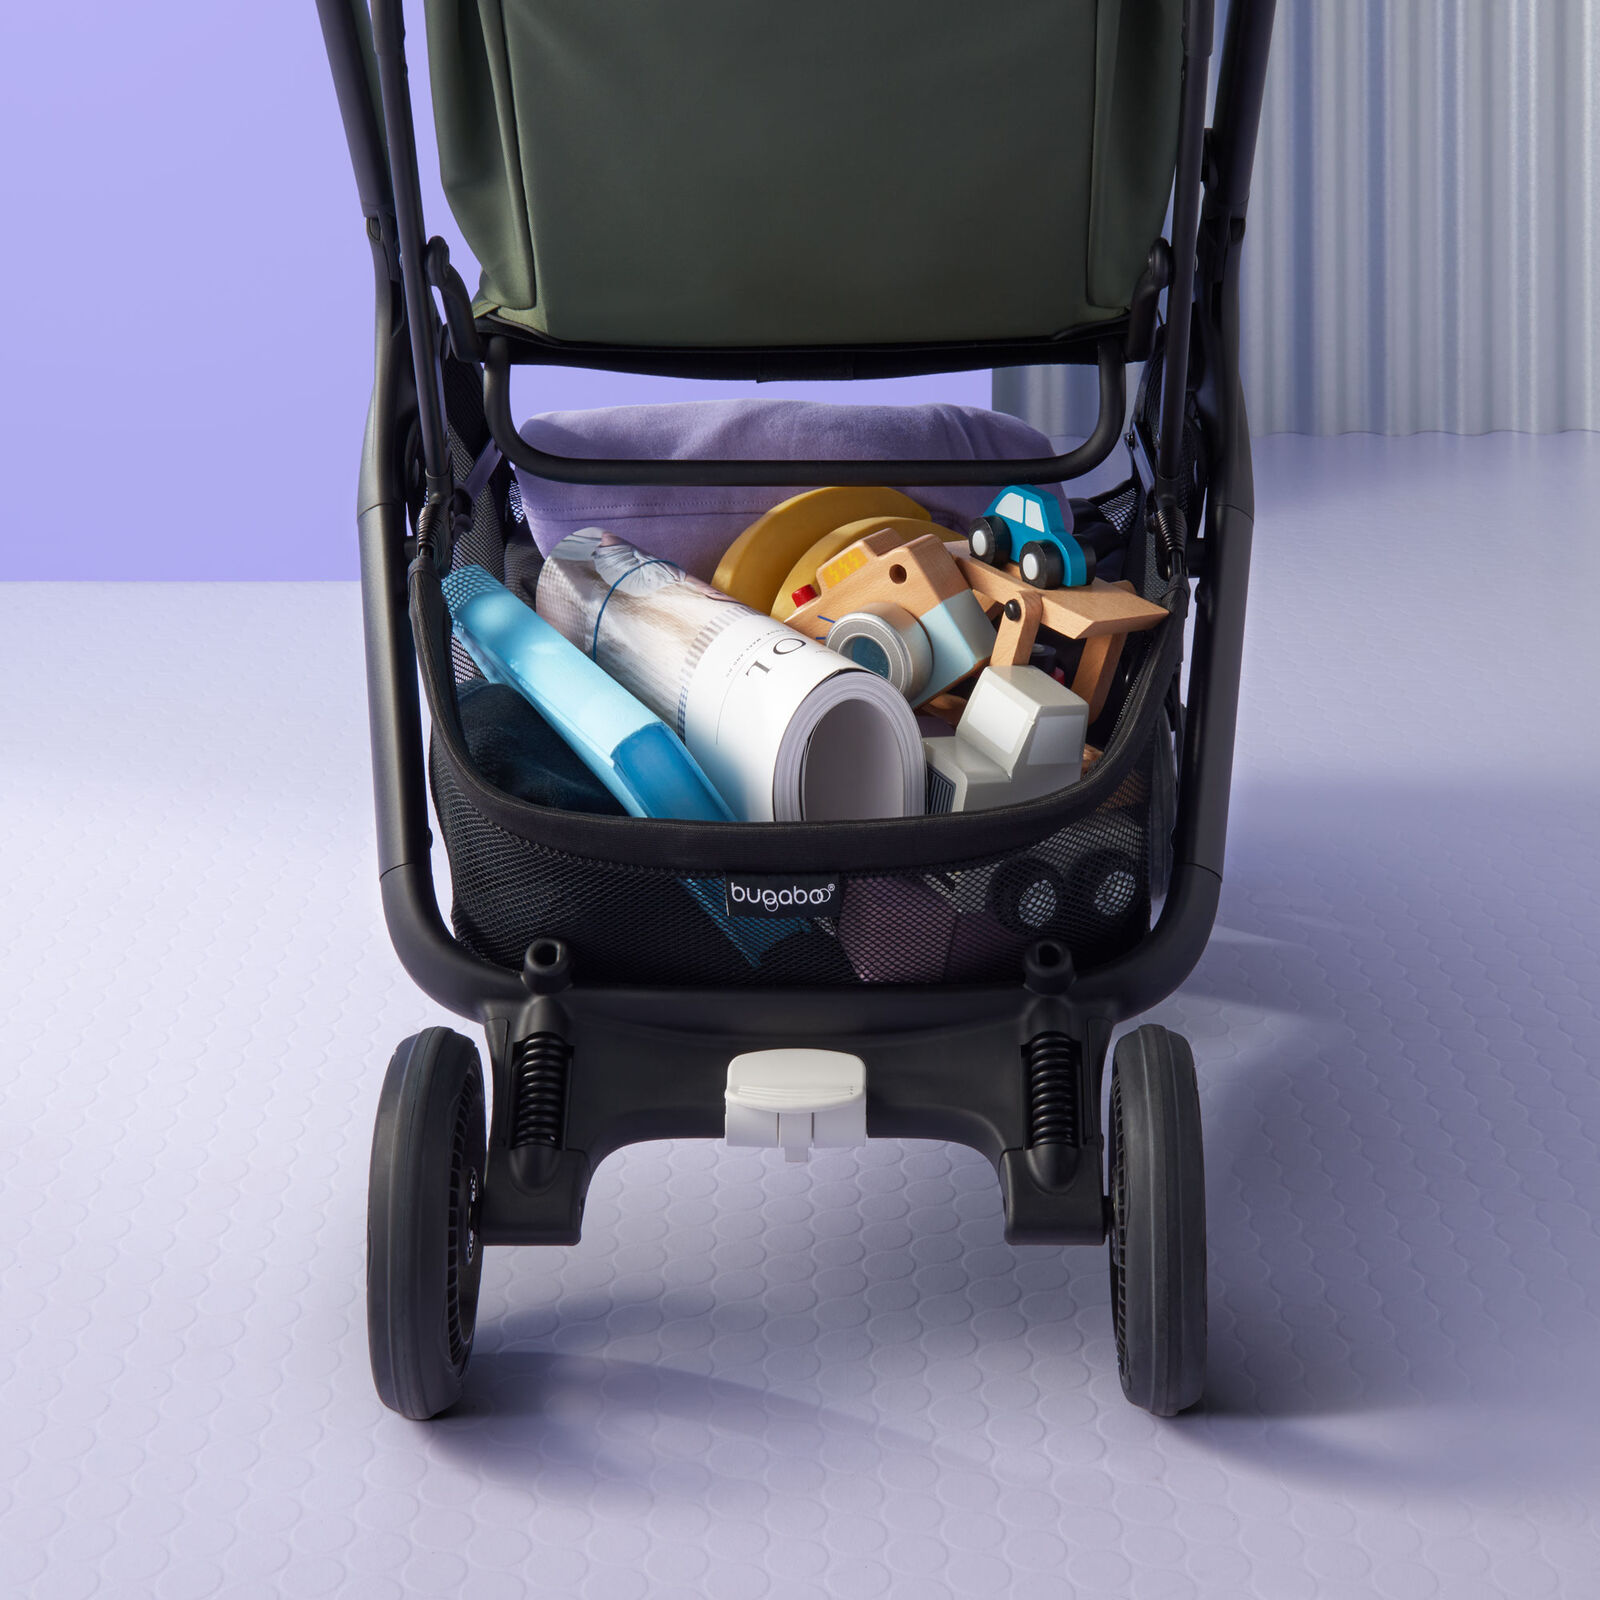 The underseat basket of the Bugaboo Butterfly stroller, with space for plenty of toys and baby essentials.